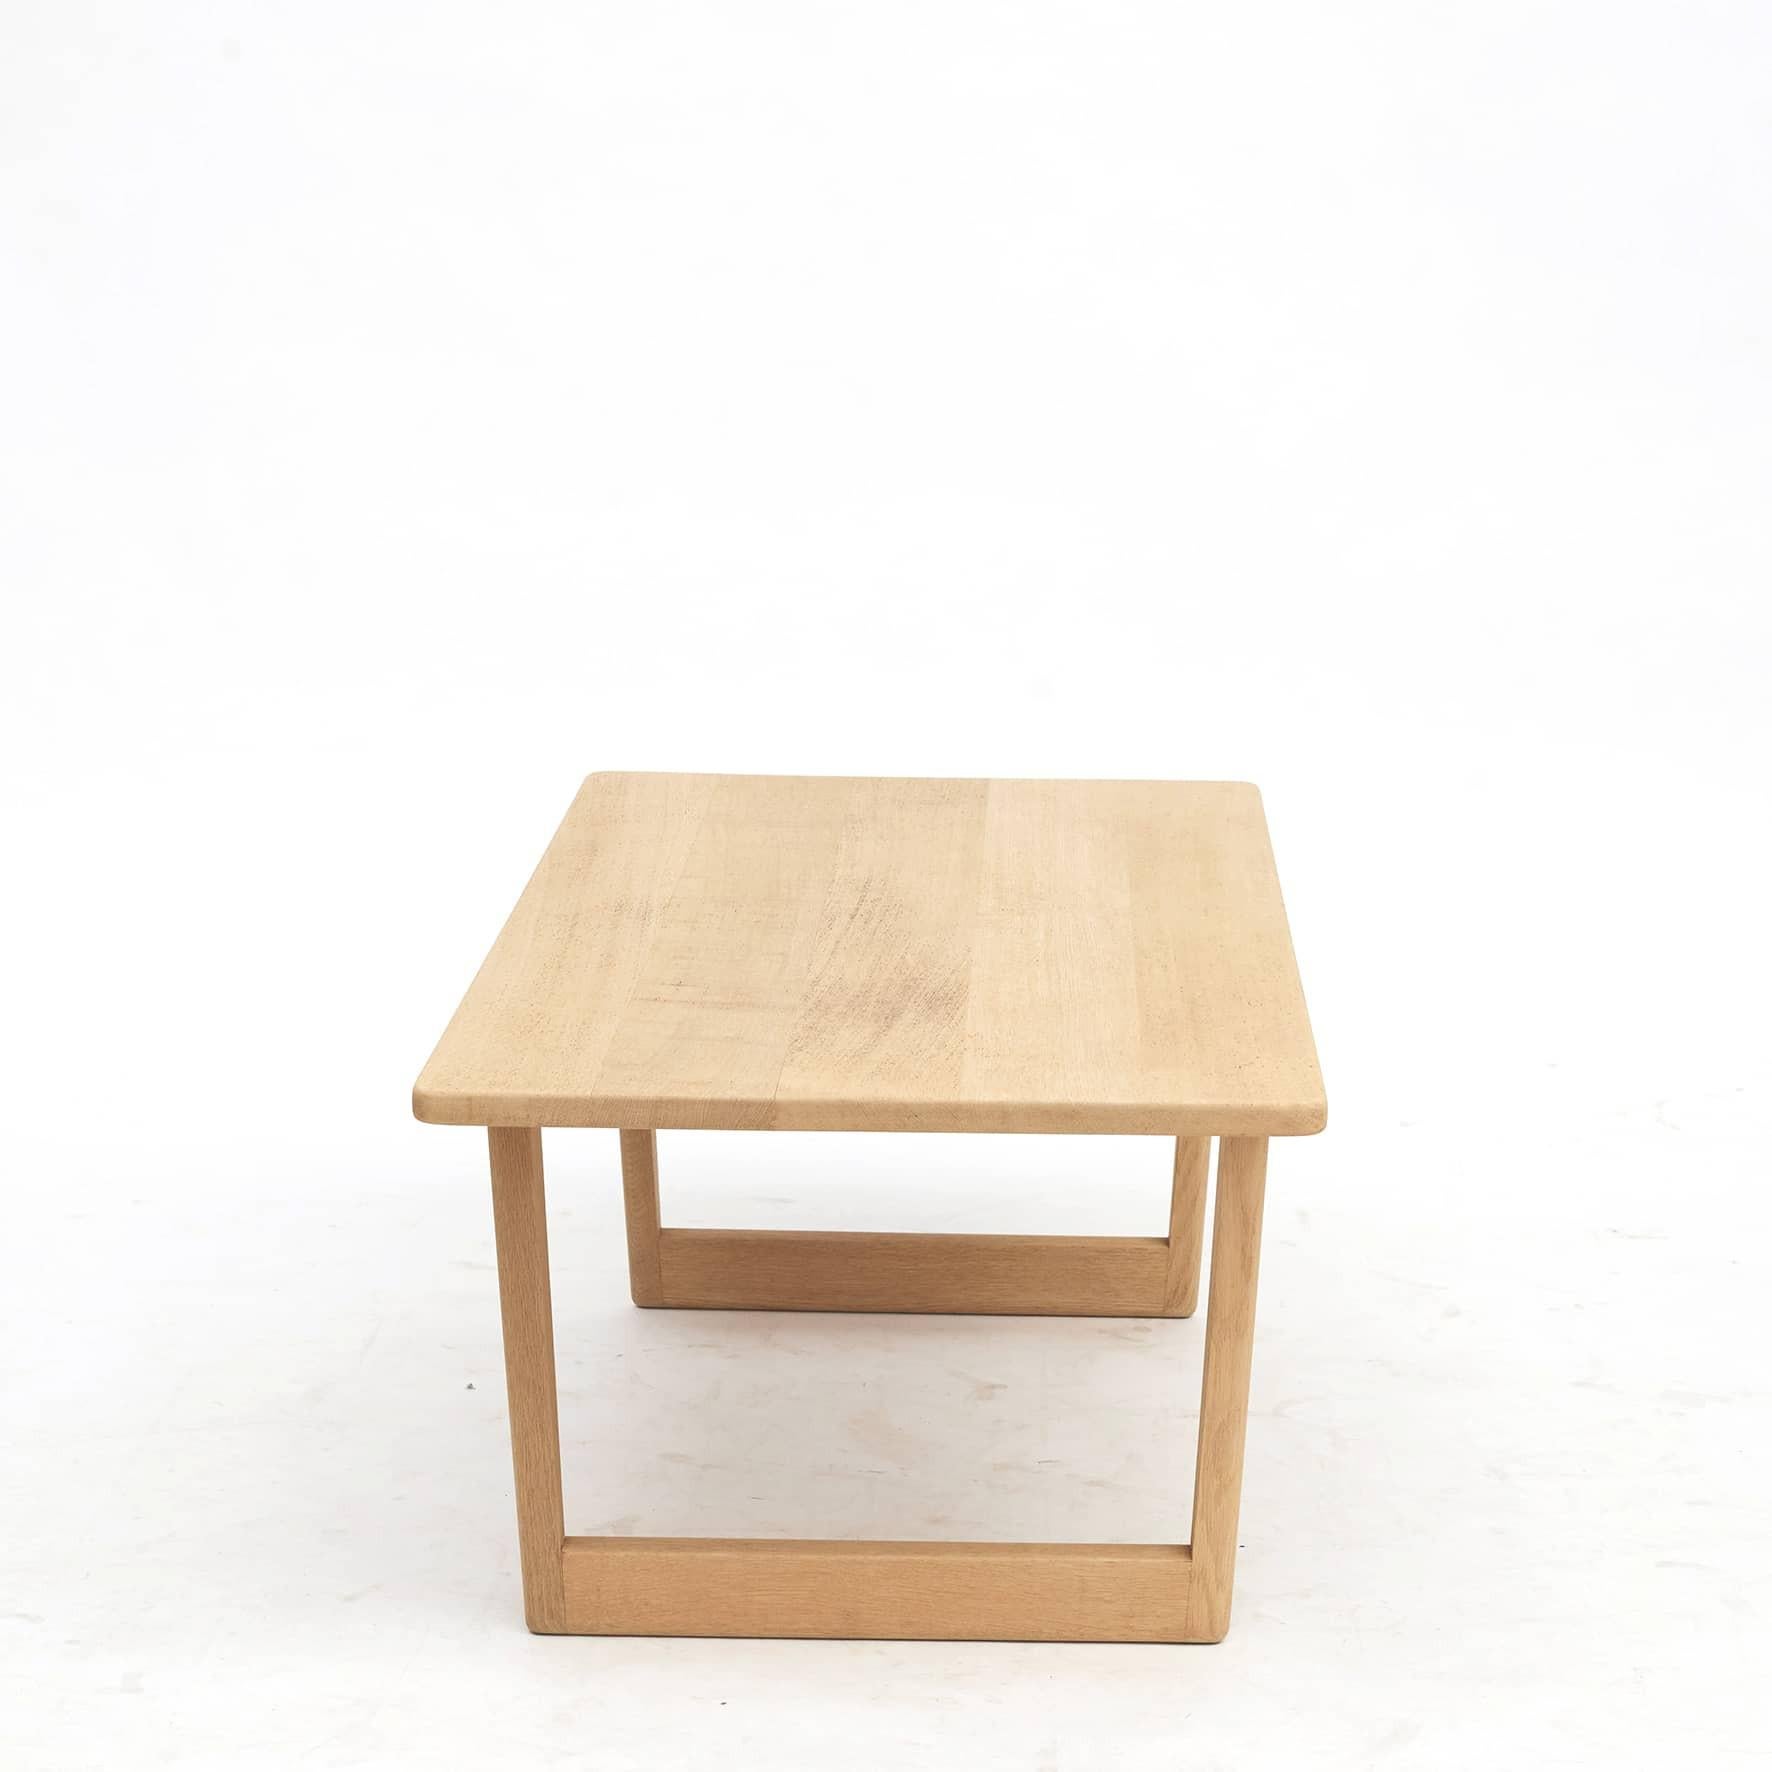 Børge Mogensen 1914-1972.
Coffee table in solid oak. Features rectangular table top and triangular legs.

Designed by Børge Mogensen in 1956 and produced by Frederica, Denmark, in the 1960s.